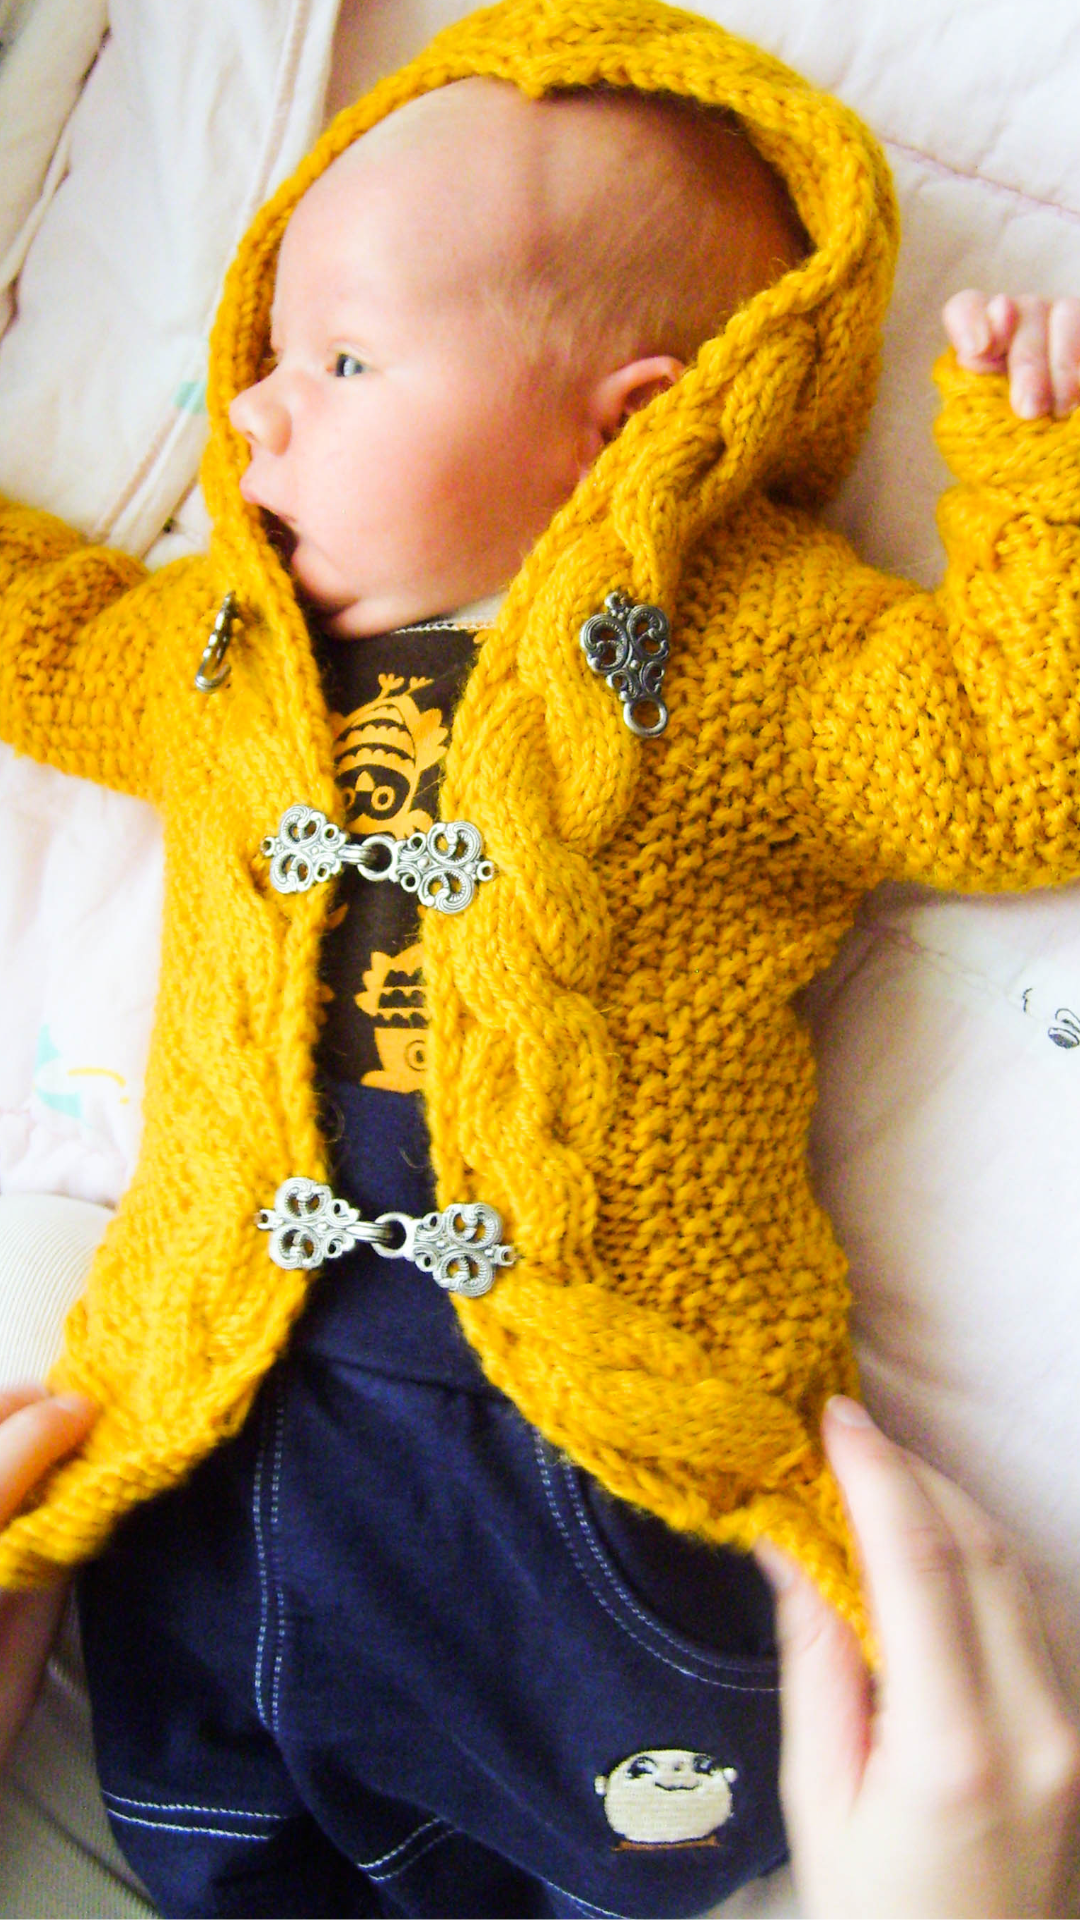 Tellervo - Cabled Baby Hooded Cardigan Knitting Pattern